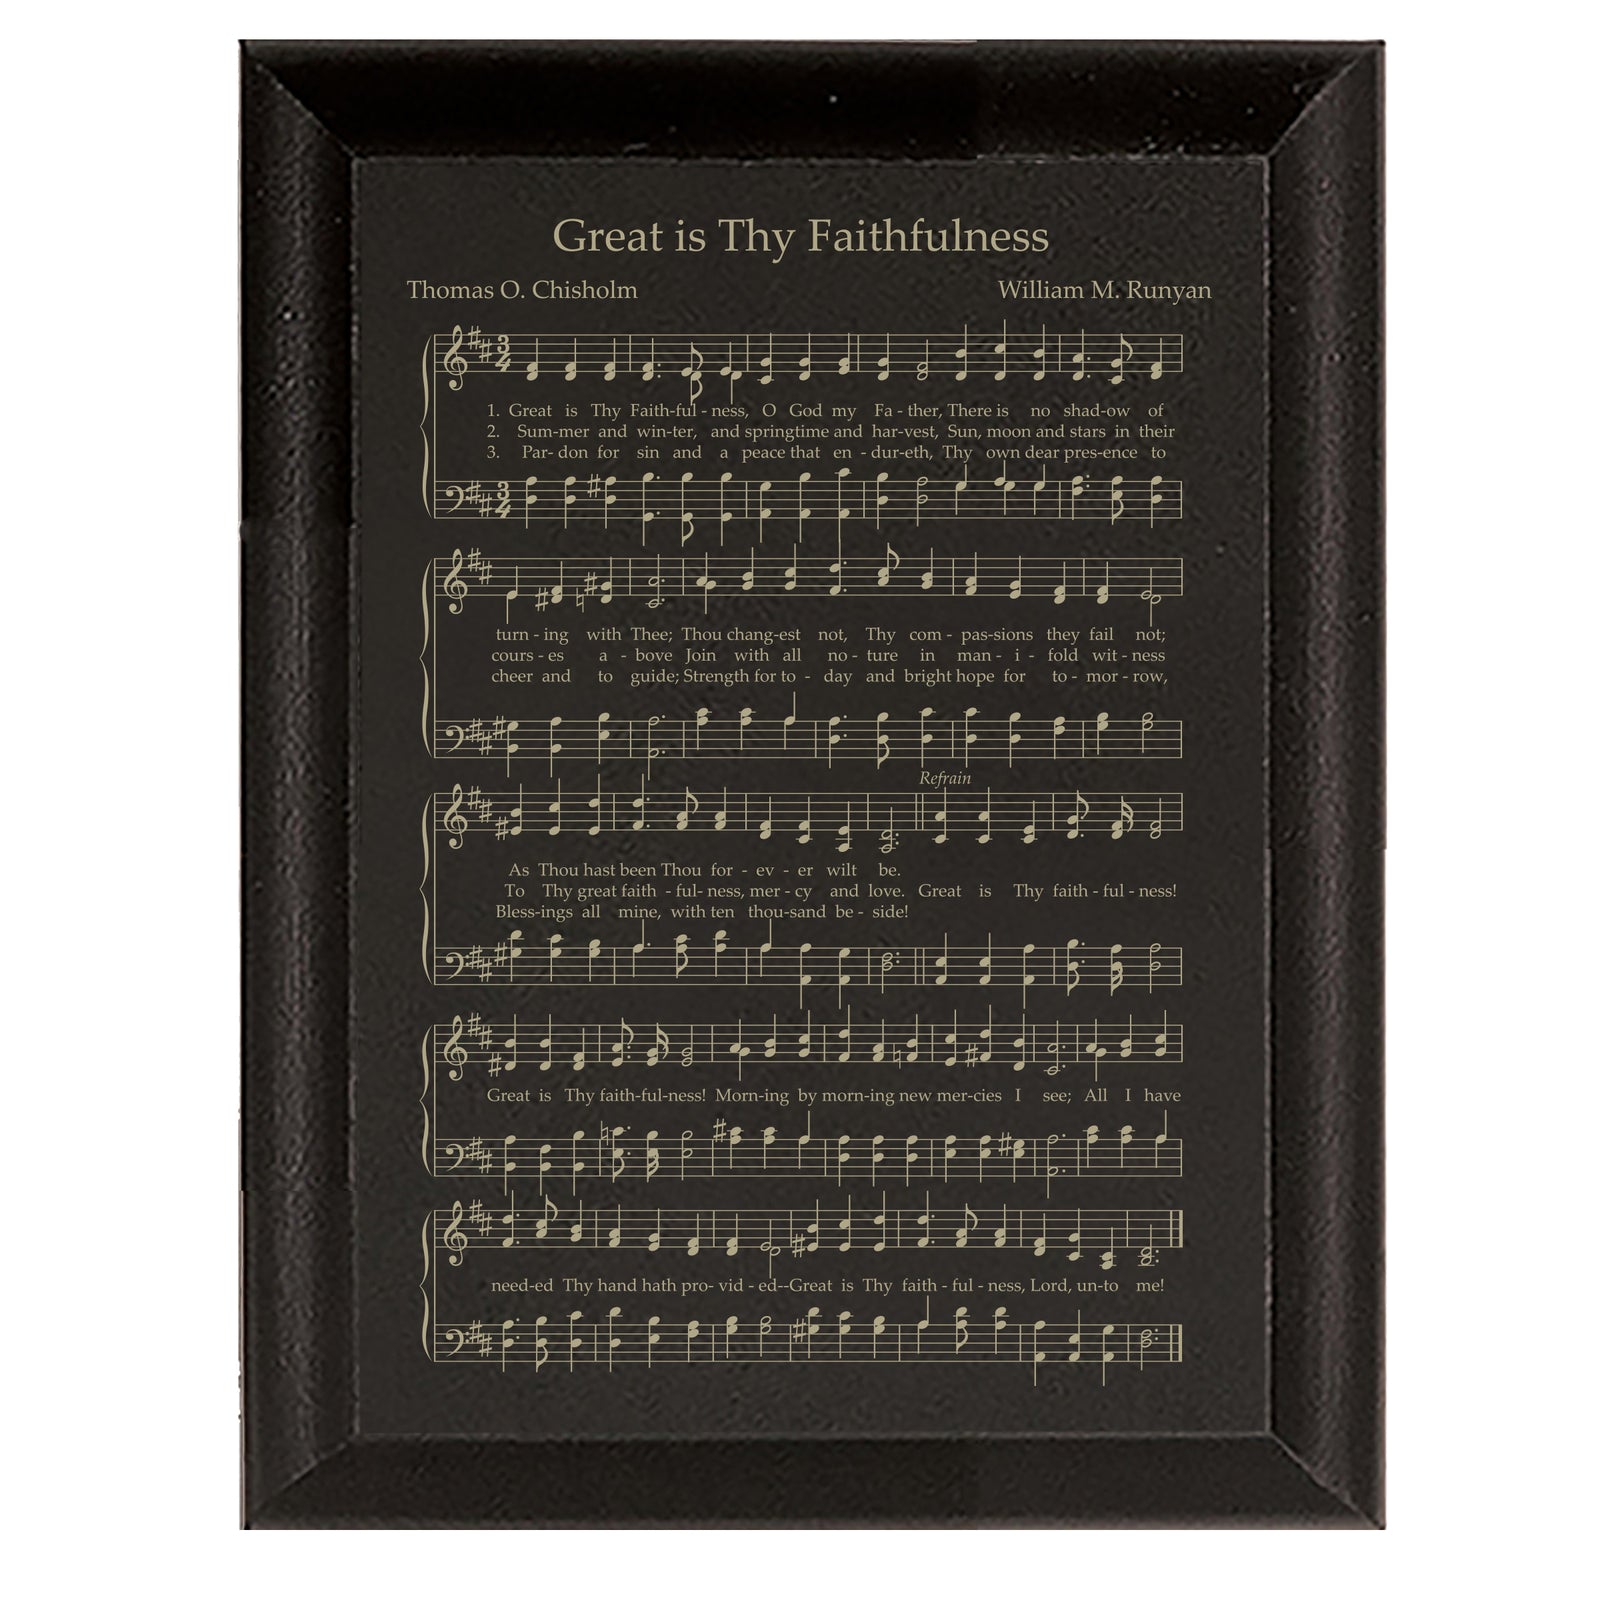 Home decor decorations quotes piano note lyrical picture rustic housewarming sentiment inspirational life house musical musically rhythmic rhythm Christian religious vintage Christmas gospel keyboard lesson manuscript musician hymnal